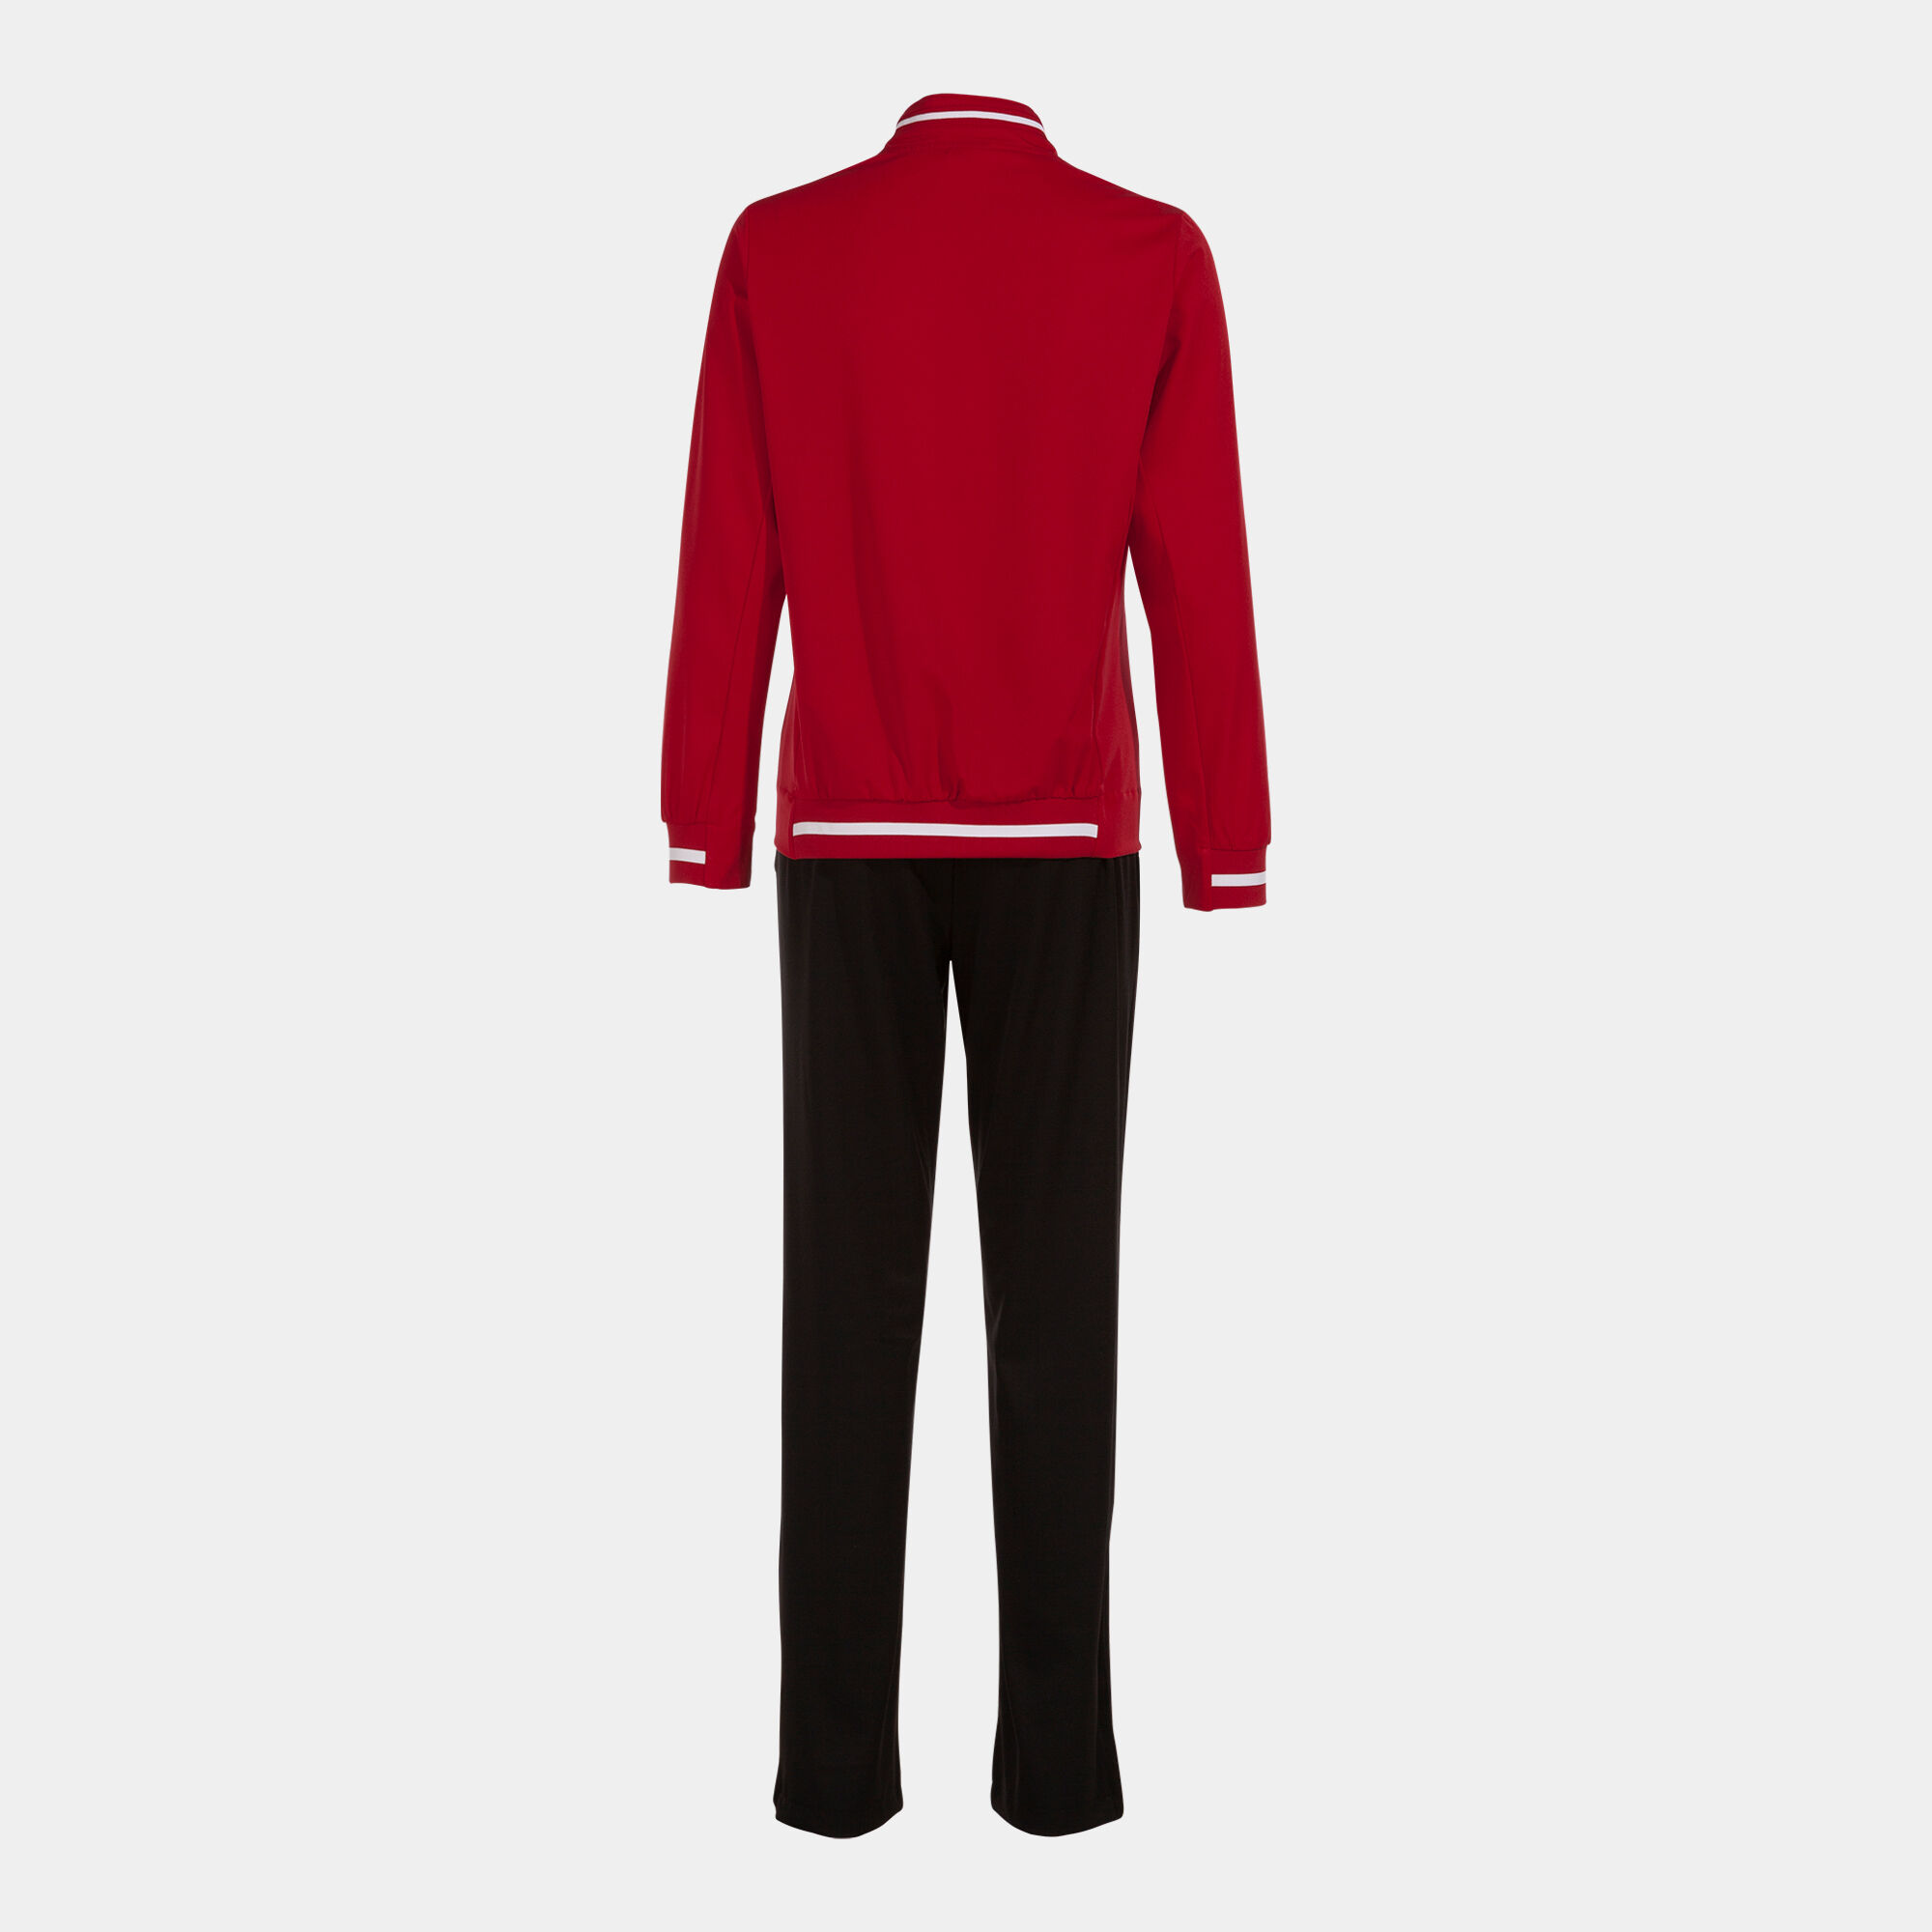 Tracksuit woman Montreal red black